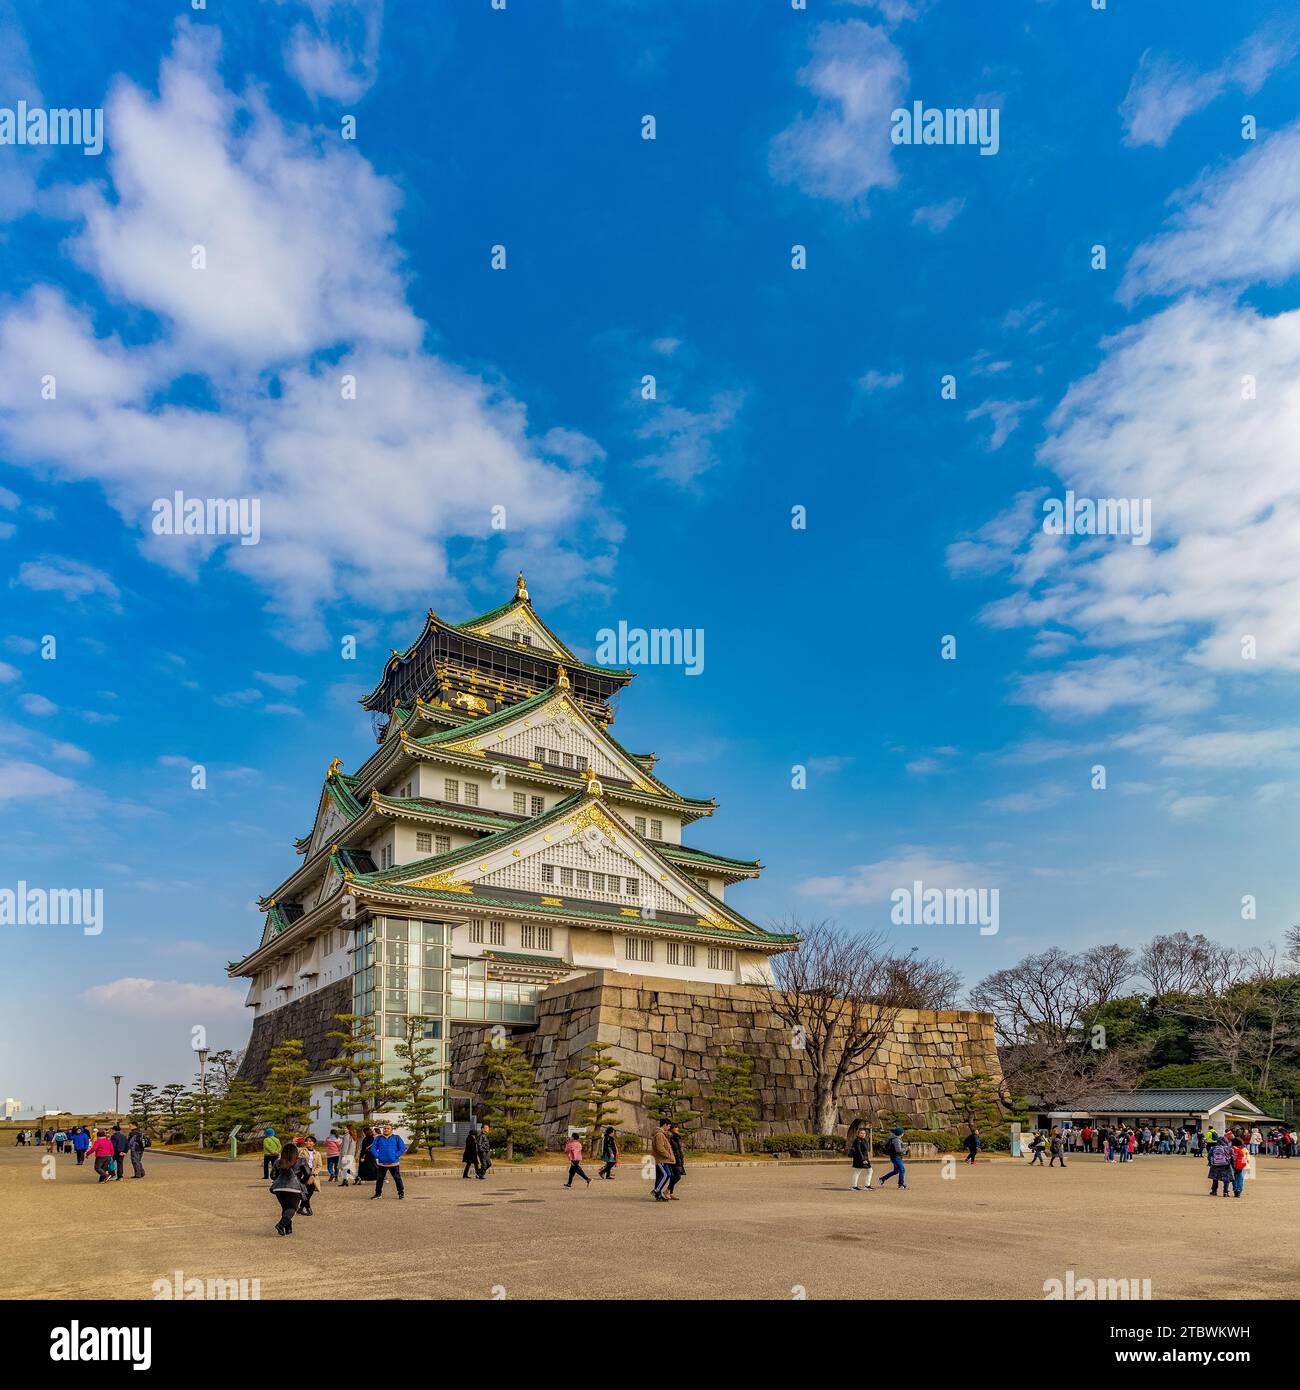 A picture of the Osaka Castle and the square around it Stock Photo